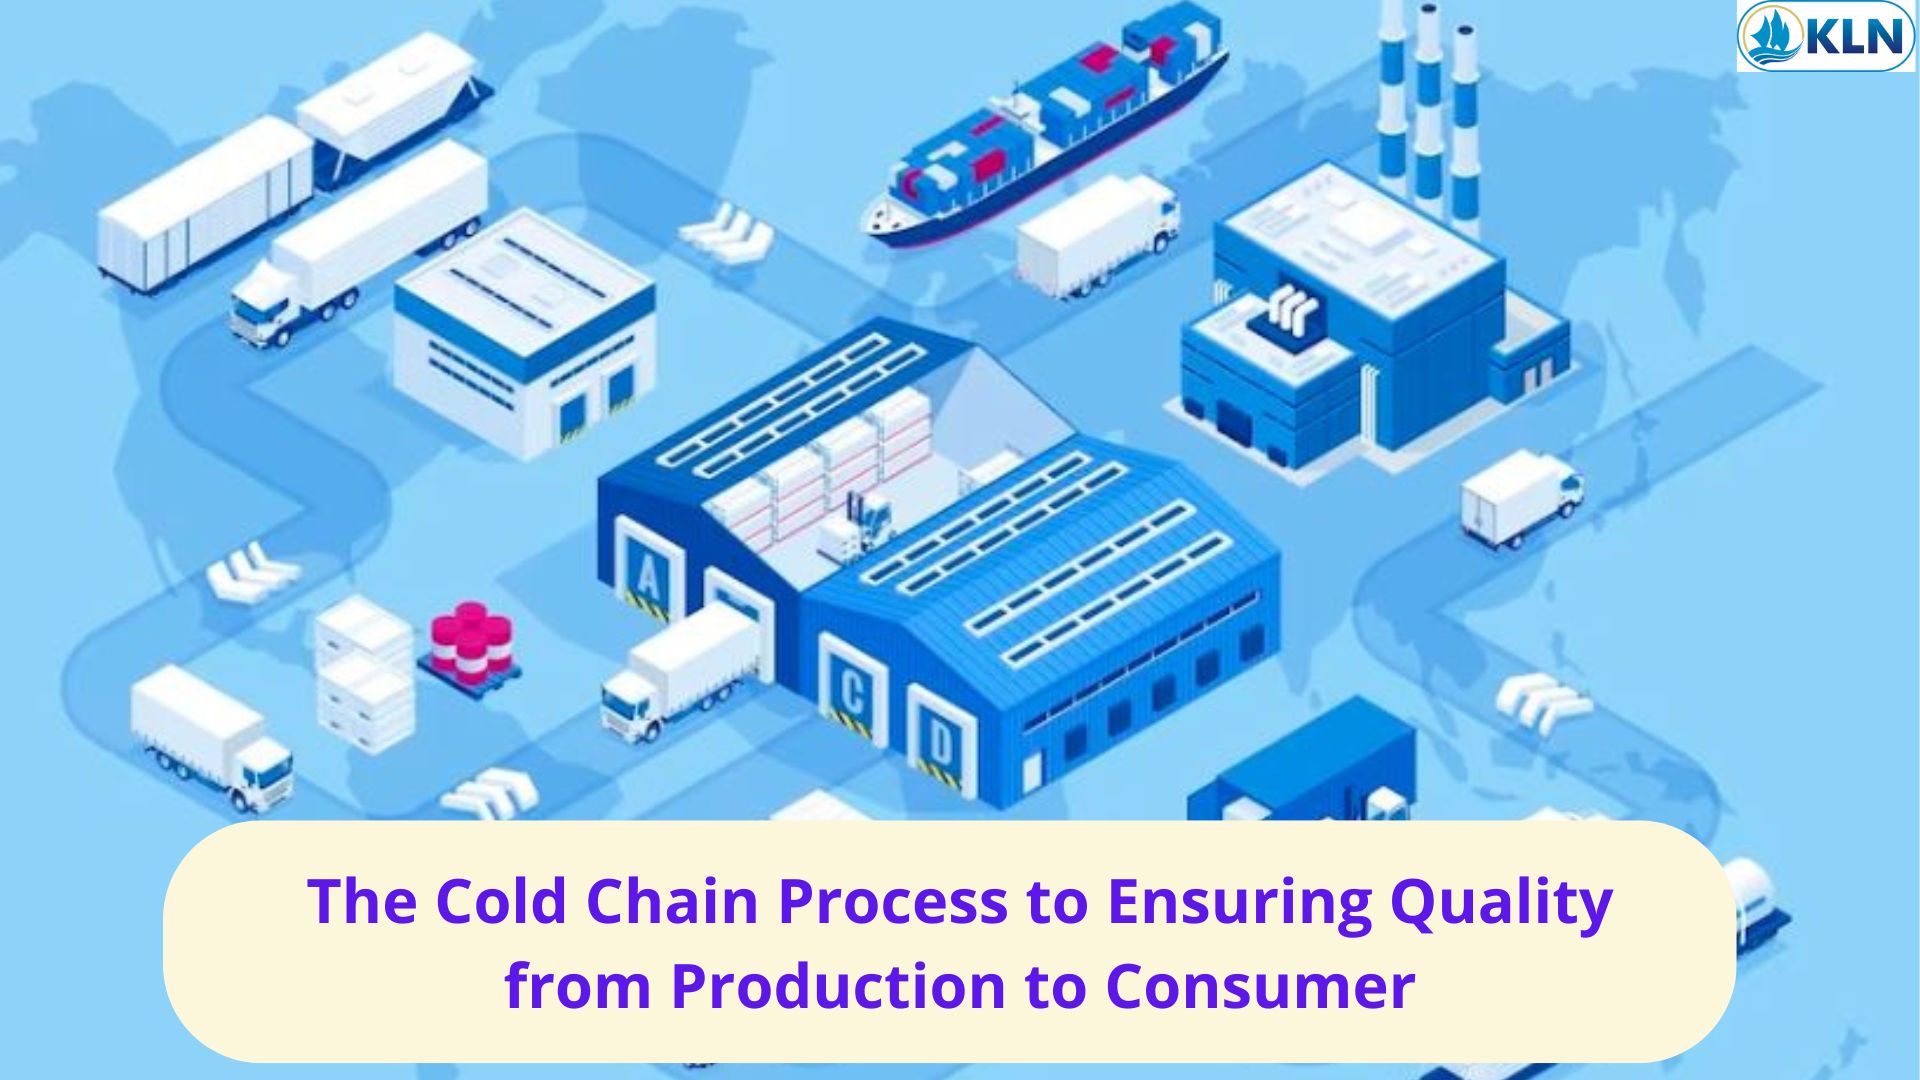 The Cold Chain Process to Ensuring Quality from Production to Consumer